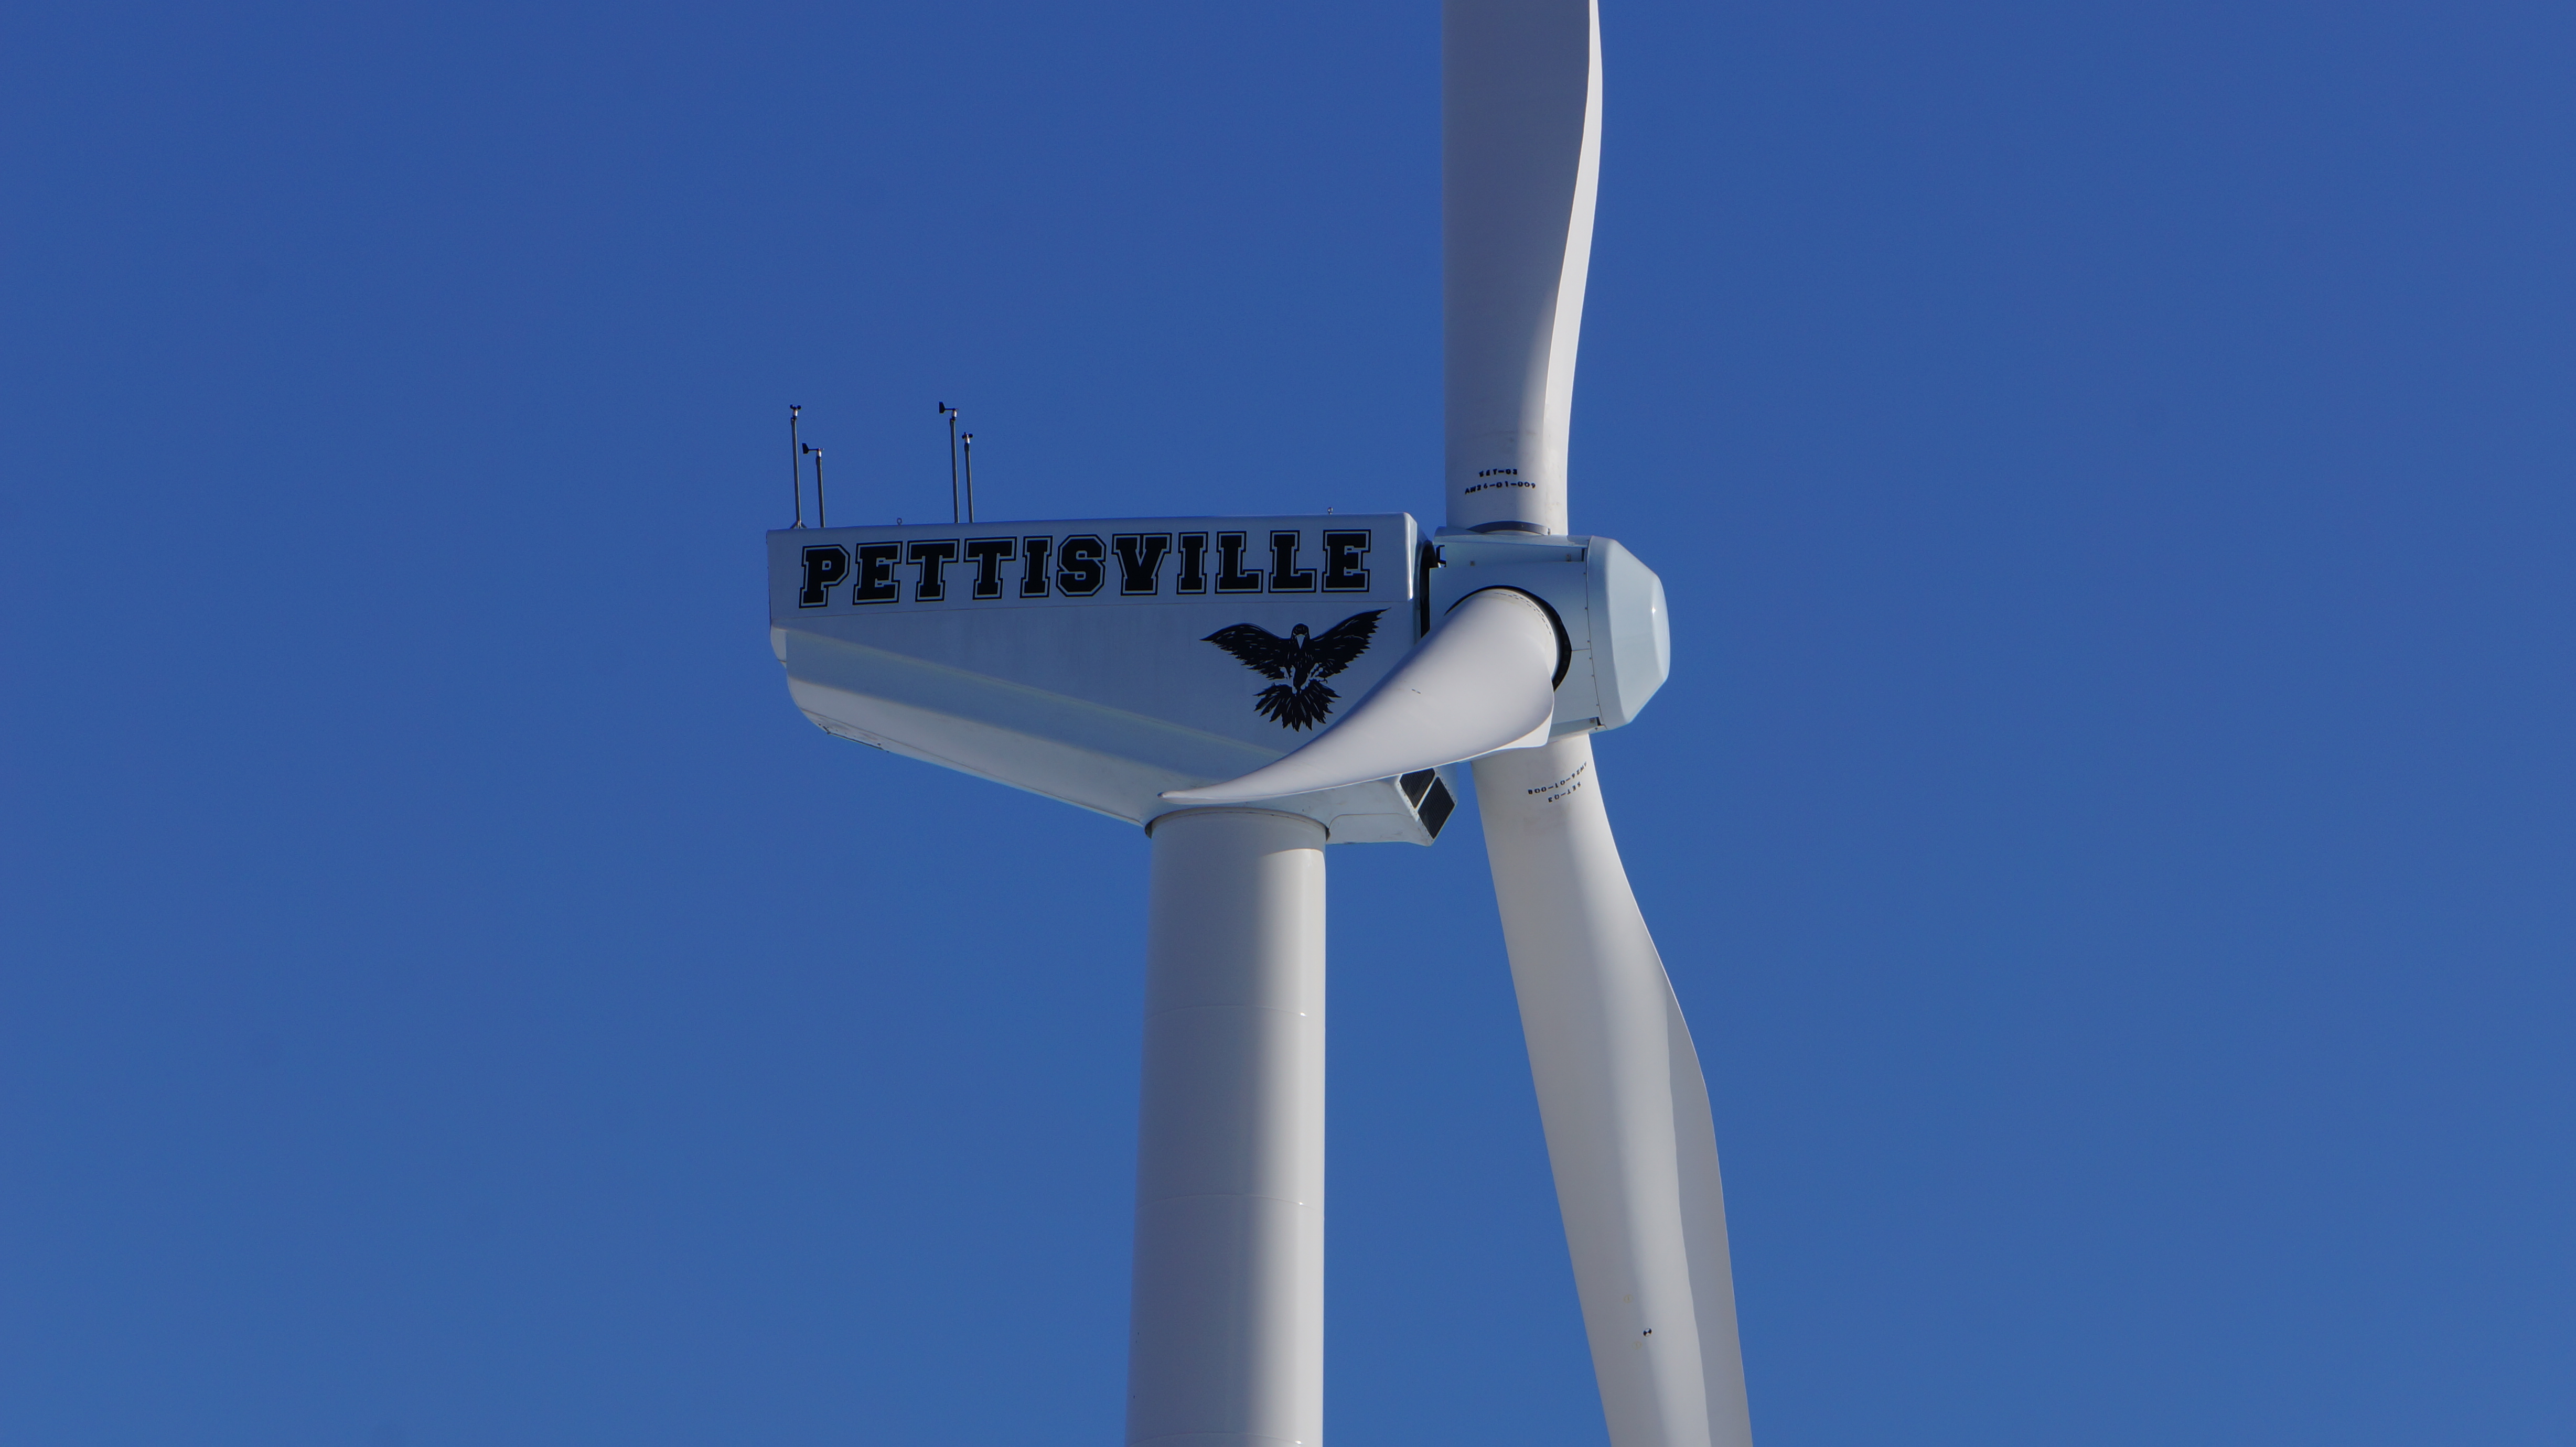 A picture of the side of the windmill that say's Pettisville and has the logo